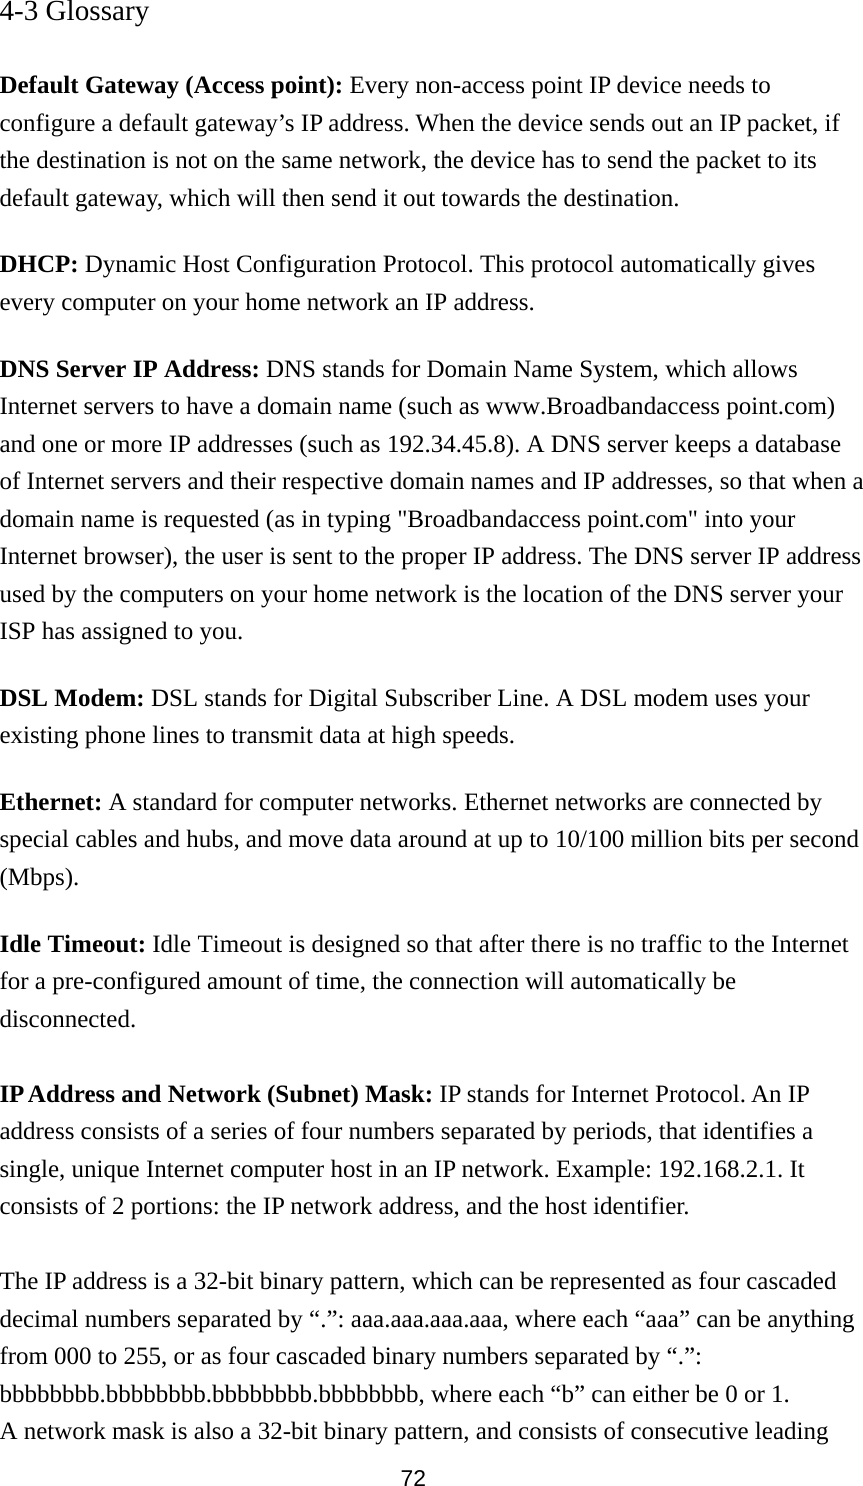  72 4-3 Glossary  Default Gateway (Access point): Every non-access point IP device needs to configure a default gateway’s IP address. When the device sends out an IP packet, if the destination is not on the same network, the device has to send the packet to its default gateway, which will then send it out towards the destination. DHCP: Dynamic Host Configuration Protocol. This protocol automatically gives every computer on your home network an IP address. DNS Server IP Address: DNS stands for Domain Name System, which allows Internet servers to have a domain name (such as www.Broadbandaccess point.com) and one or more IP addresses (such as 192.34.45.8). A DNS server keeps a database of Internet servers and their respective domain names and IP addresses, so that when a domain name is requested (as in typing &quot;Broadbandaccess point.com&quot; into your Internet browser), the user is sent to the proper IP address. The DNS server IP address used by the computers on your home network is the location of the DNS server your ISP has assigned to you.   DSL Modem: DSL stands for Digital Subscriber Line. A DSL modem uses your existing phone lines to transmit data at high speeds.   Ethernet: A standard for computer networks. Ethernet networks are connected by special cables and hubs, and move data around at up to 10/100 million bits per second (Mbps).  Idle Timeout: Idle Timeout is designed so that after there is no traffic to the Internet for a pre-configured amount of time, the connection will automatically be disconnected.  IP Address and Network (Subnet) Mask: IP stands for Internet Protocol. An IP address consists of a series of four numbers separated by periods, that identifies a single, unique Internet computer host in an IP network. Example: 192.168.2.1. It consists of 2 portions: the IP network address, and the host identifier.  The IP address is a 32-bit binary pattern, which can be represented as four cascaded decimal numbers separated by “.”: aaa.aaa.aaa.aaa, where each “aaa” can be anything from 000 to 255, or as four cascaded binary numbers separated by “.”: bbbbbbbb.bbbbbbbb.bbbbbbbb.bbbbbbbb, where each “b” can either be 0 or 1. A network mask is also a 32-bit binary pattern, and consists of consecutive leading 